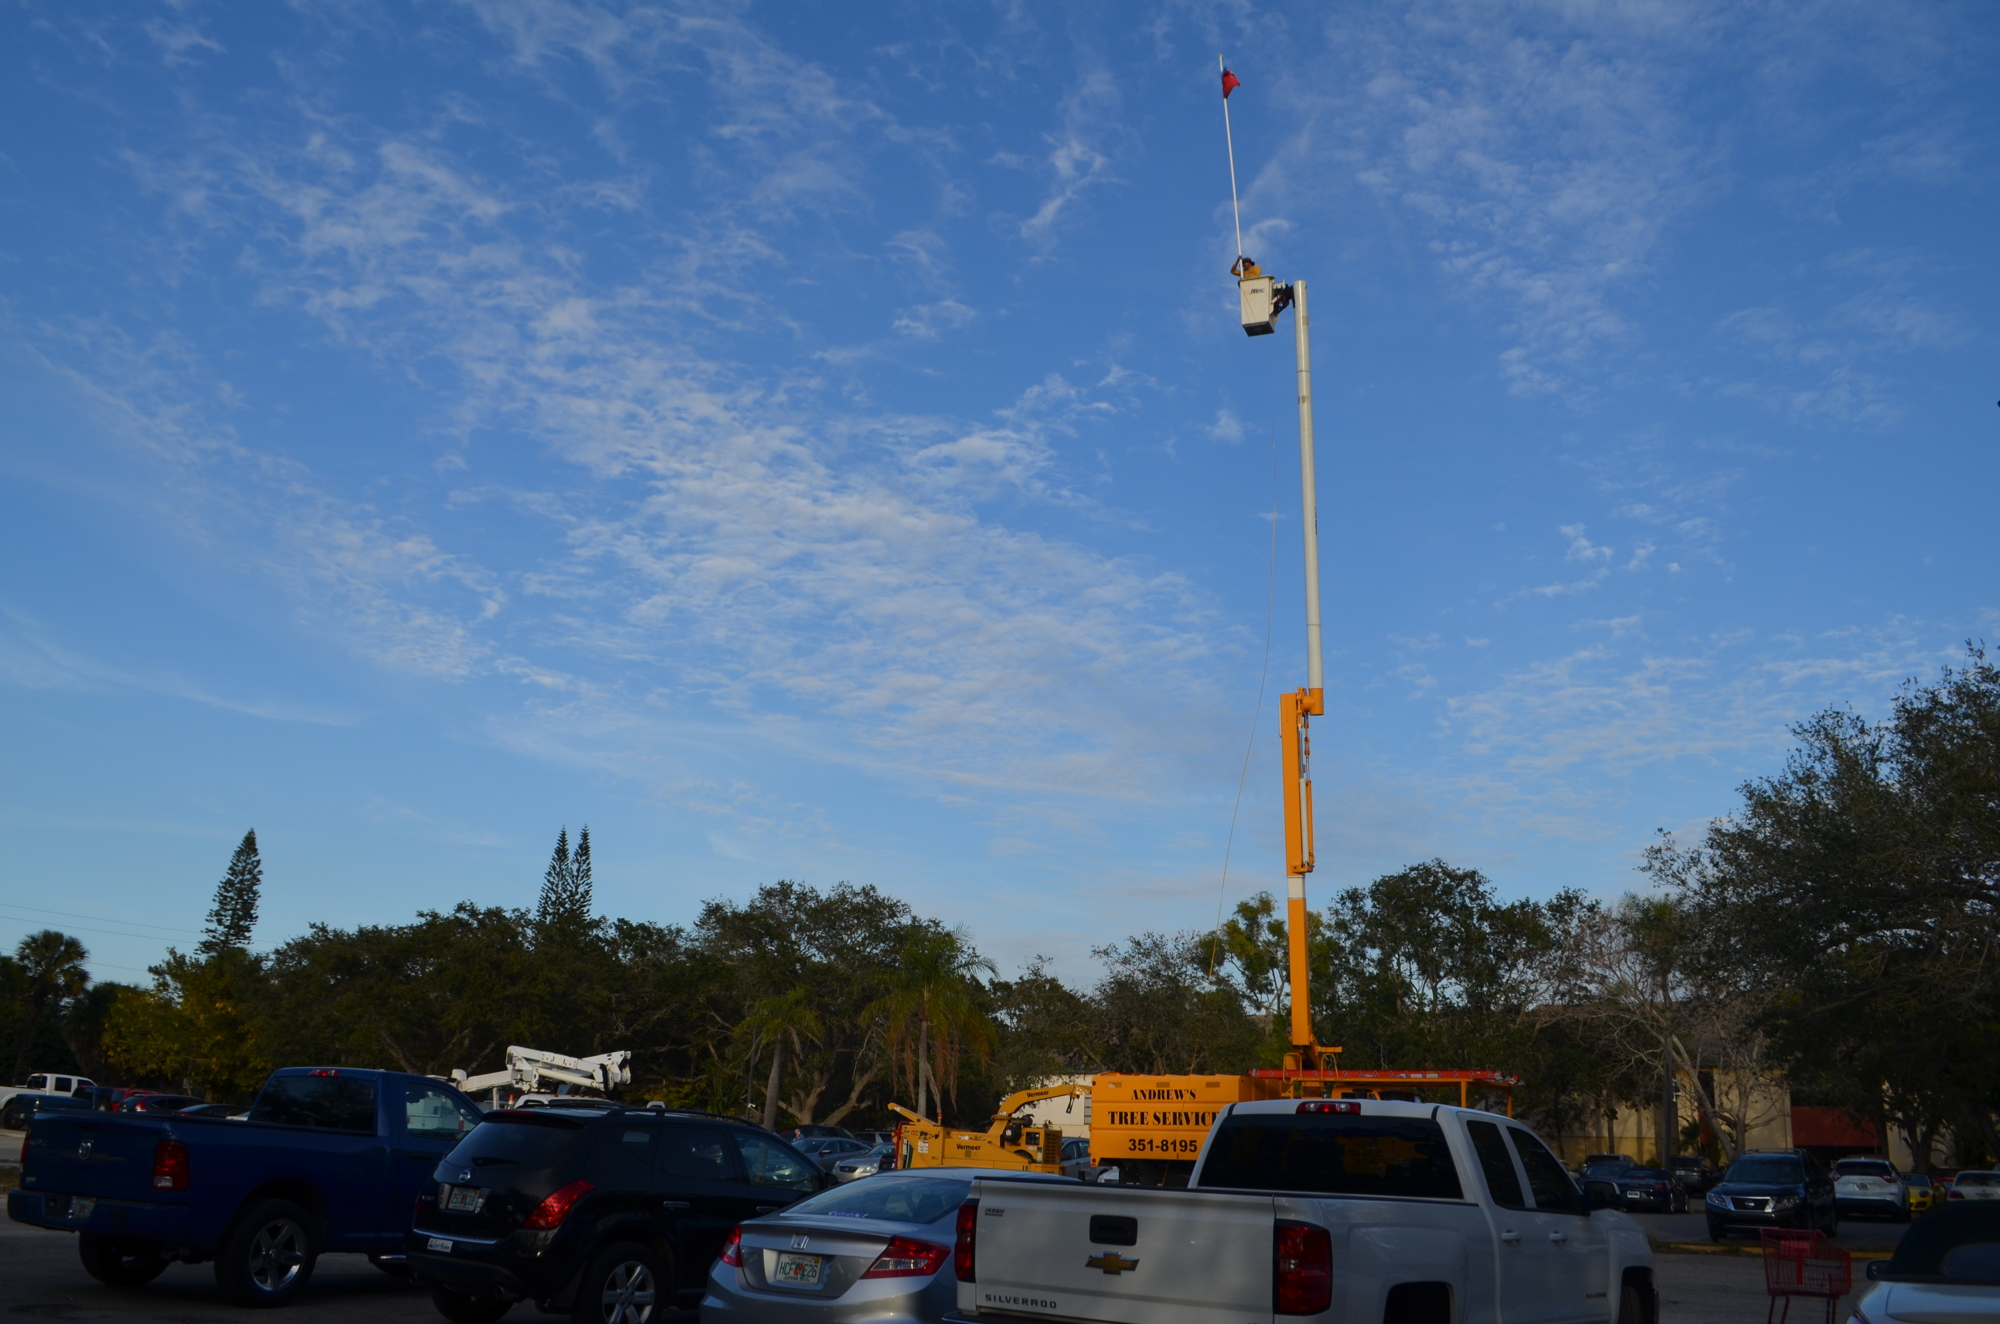 A man in a bucket truck holds a flag 81 feet above the ground to mark the proposed height of a seven-story building in what is currently the Bath and Racquet Club parking lot.